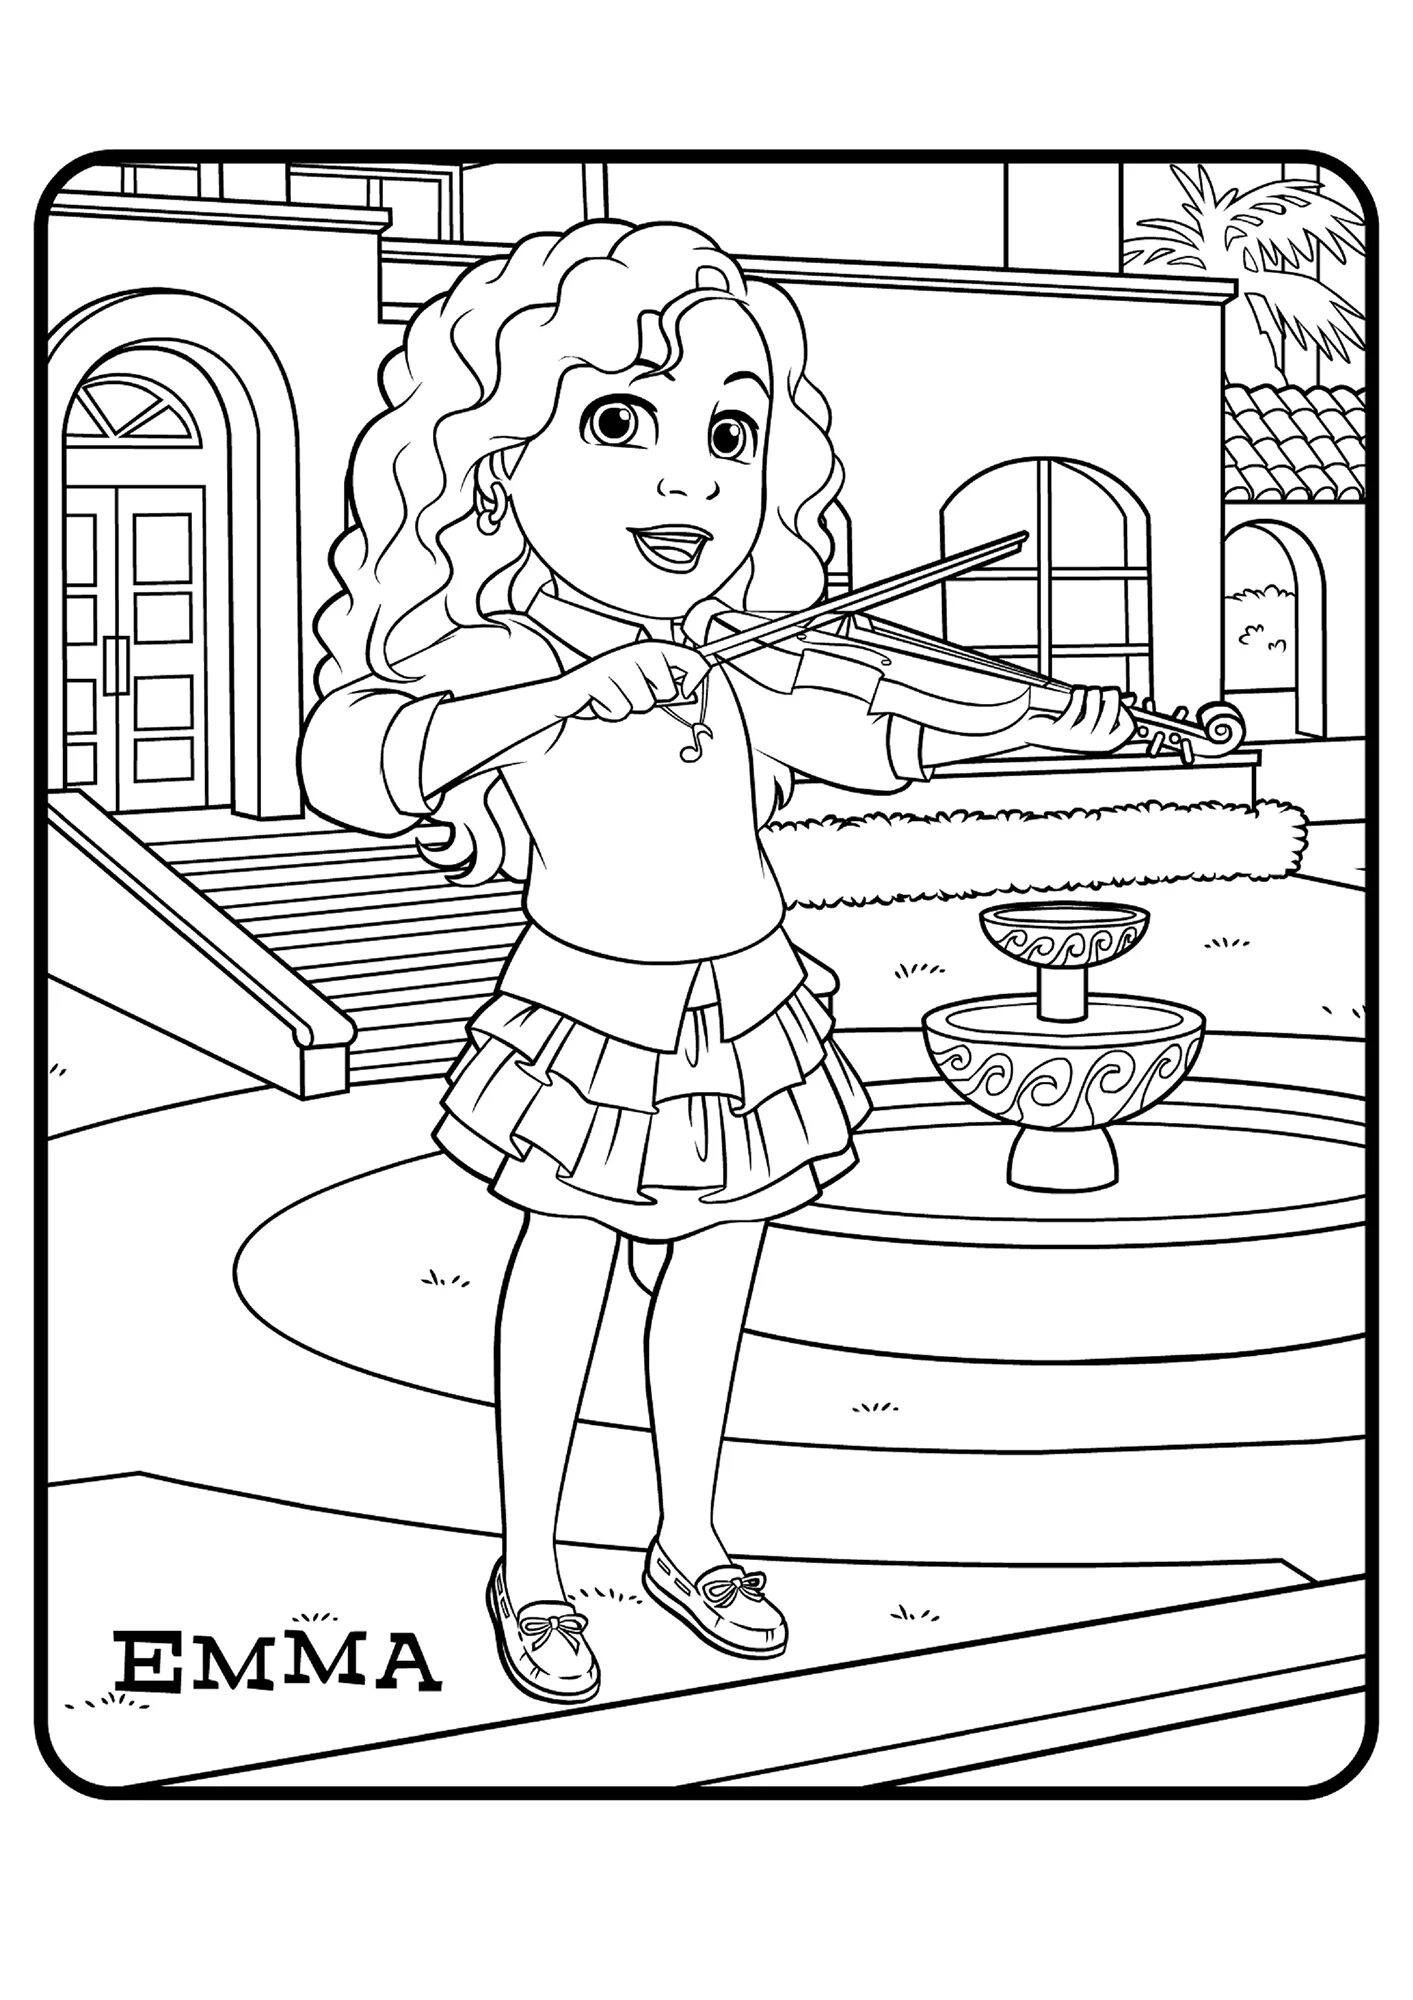 Coloring witty emma